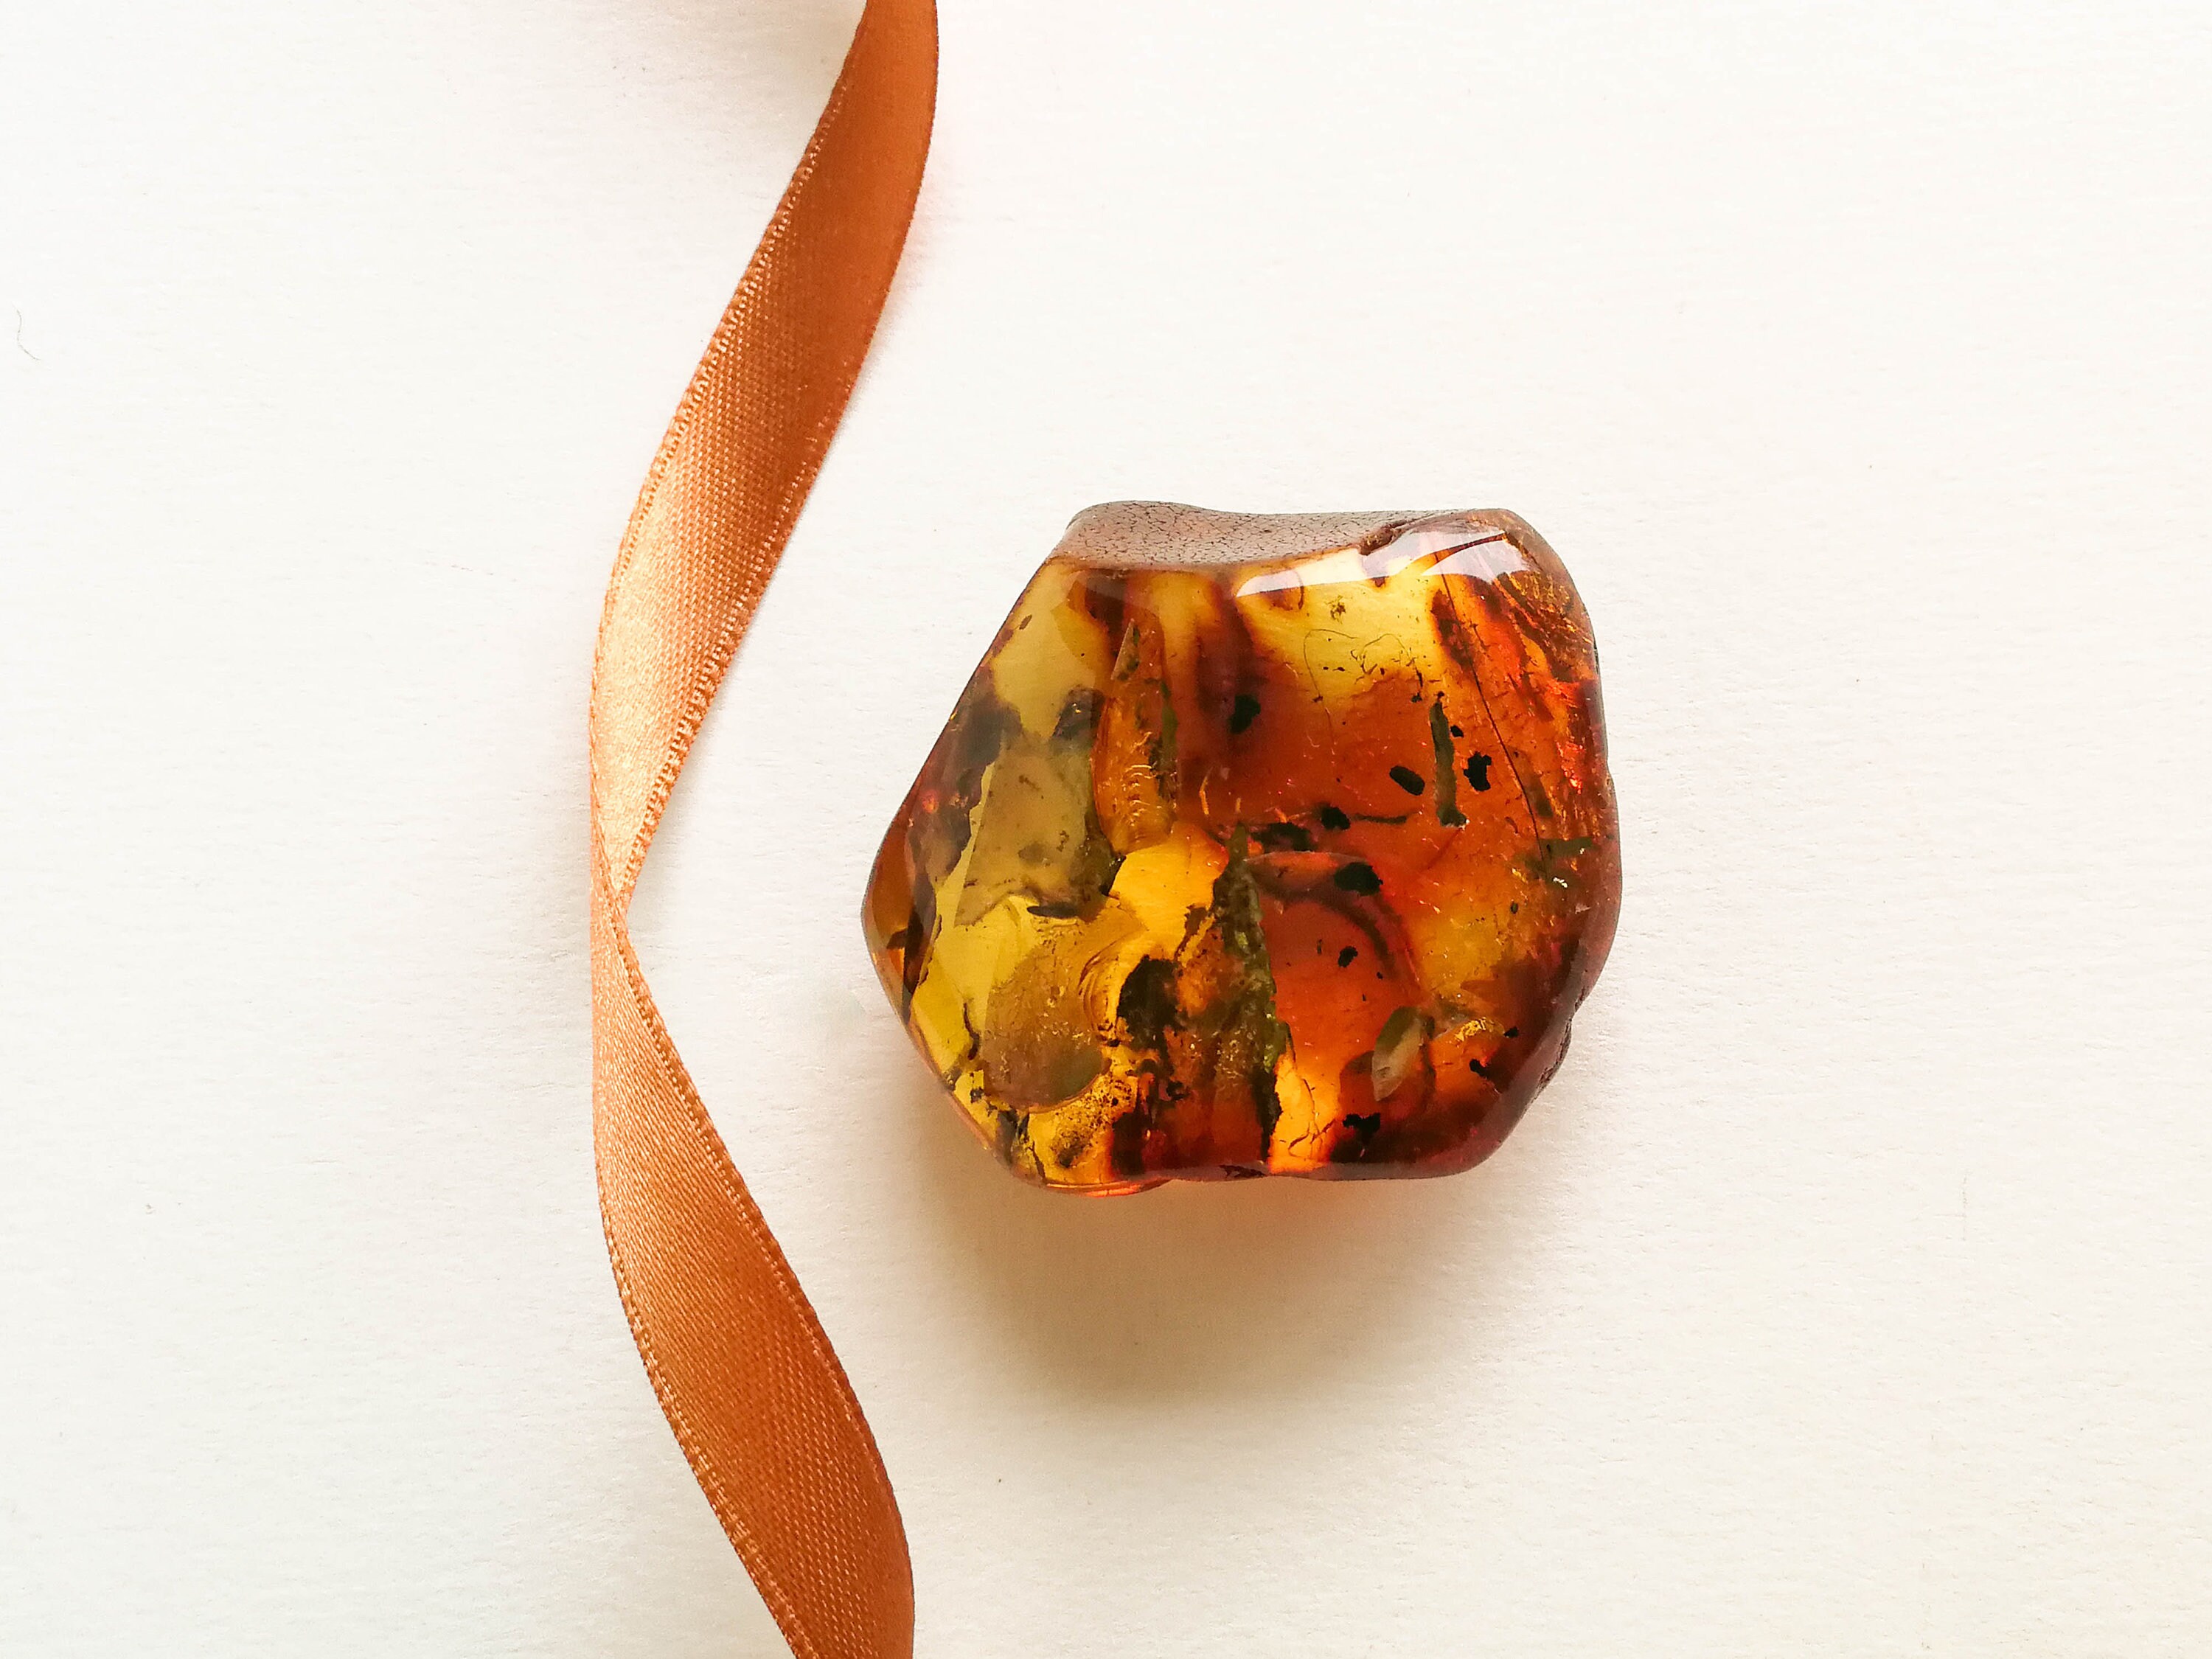 Amber With Insects Home Decoration, Large Oval Amber Resin Souvenir,  Memento Huge Cognac Color Amber Spiritual Gift, Amber Inclusions Bits 